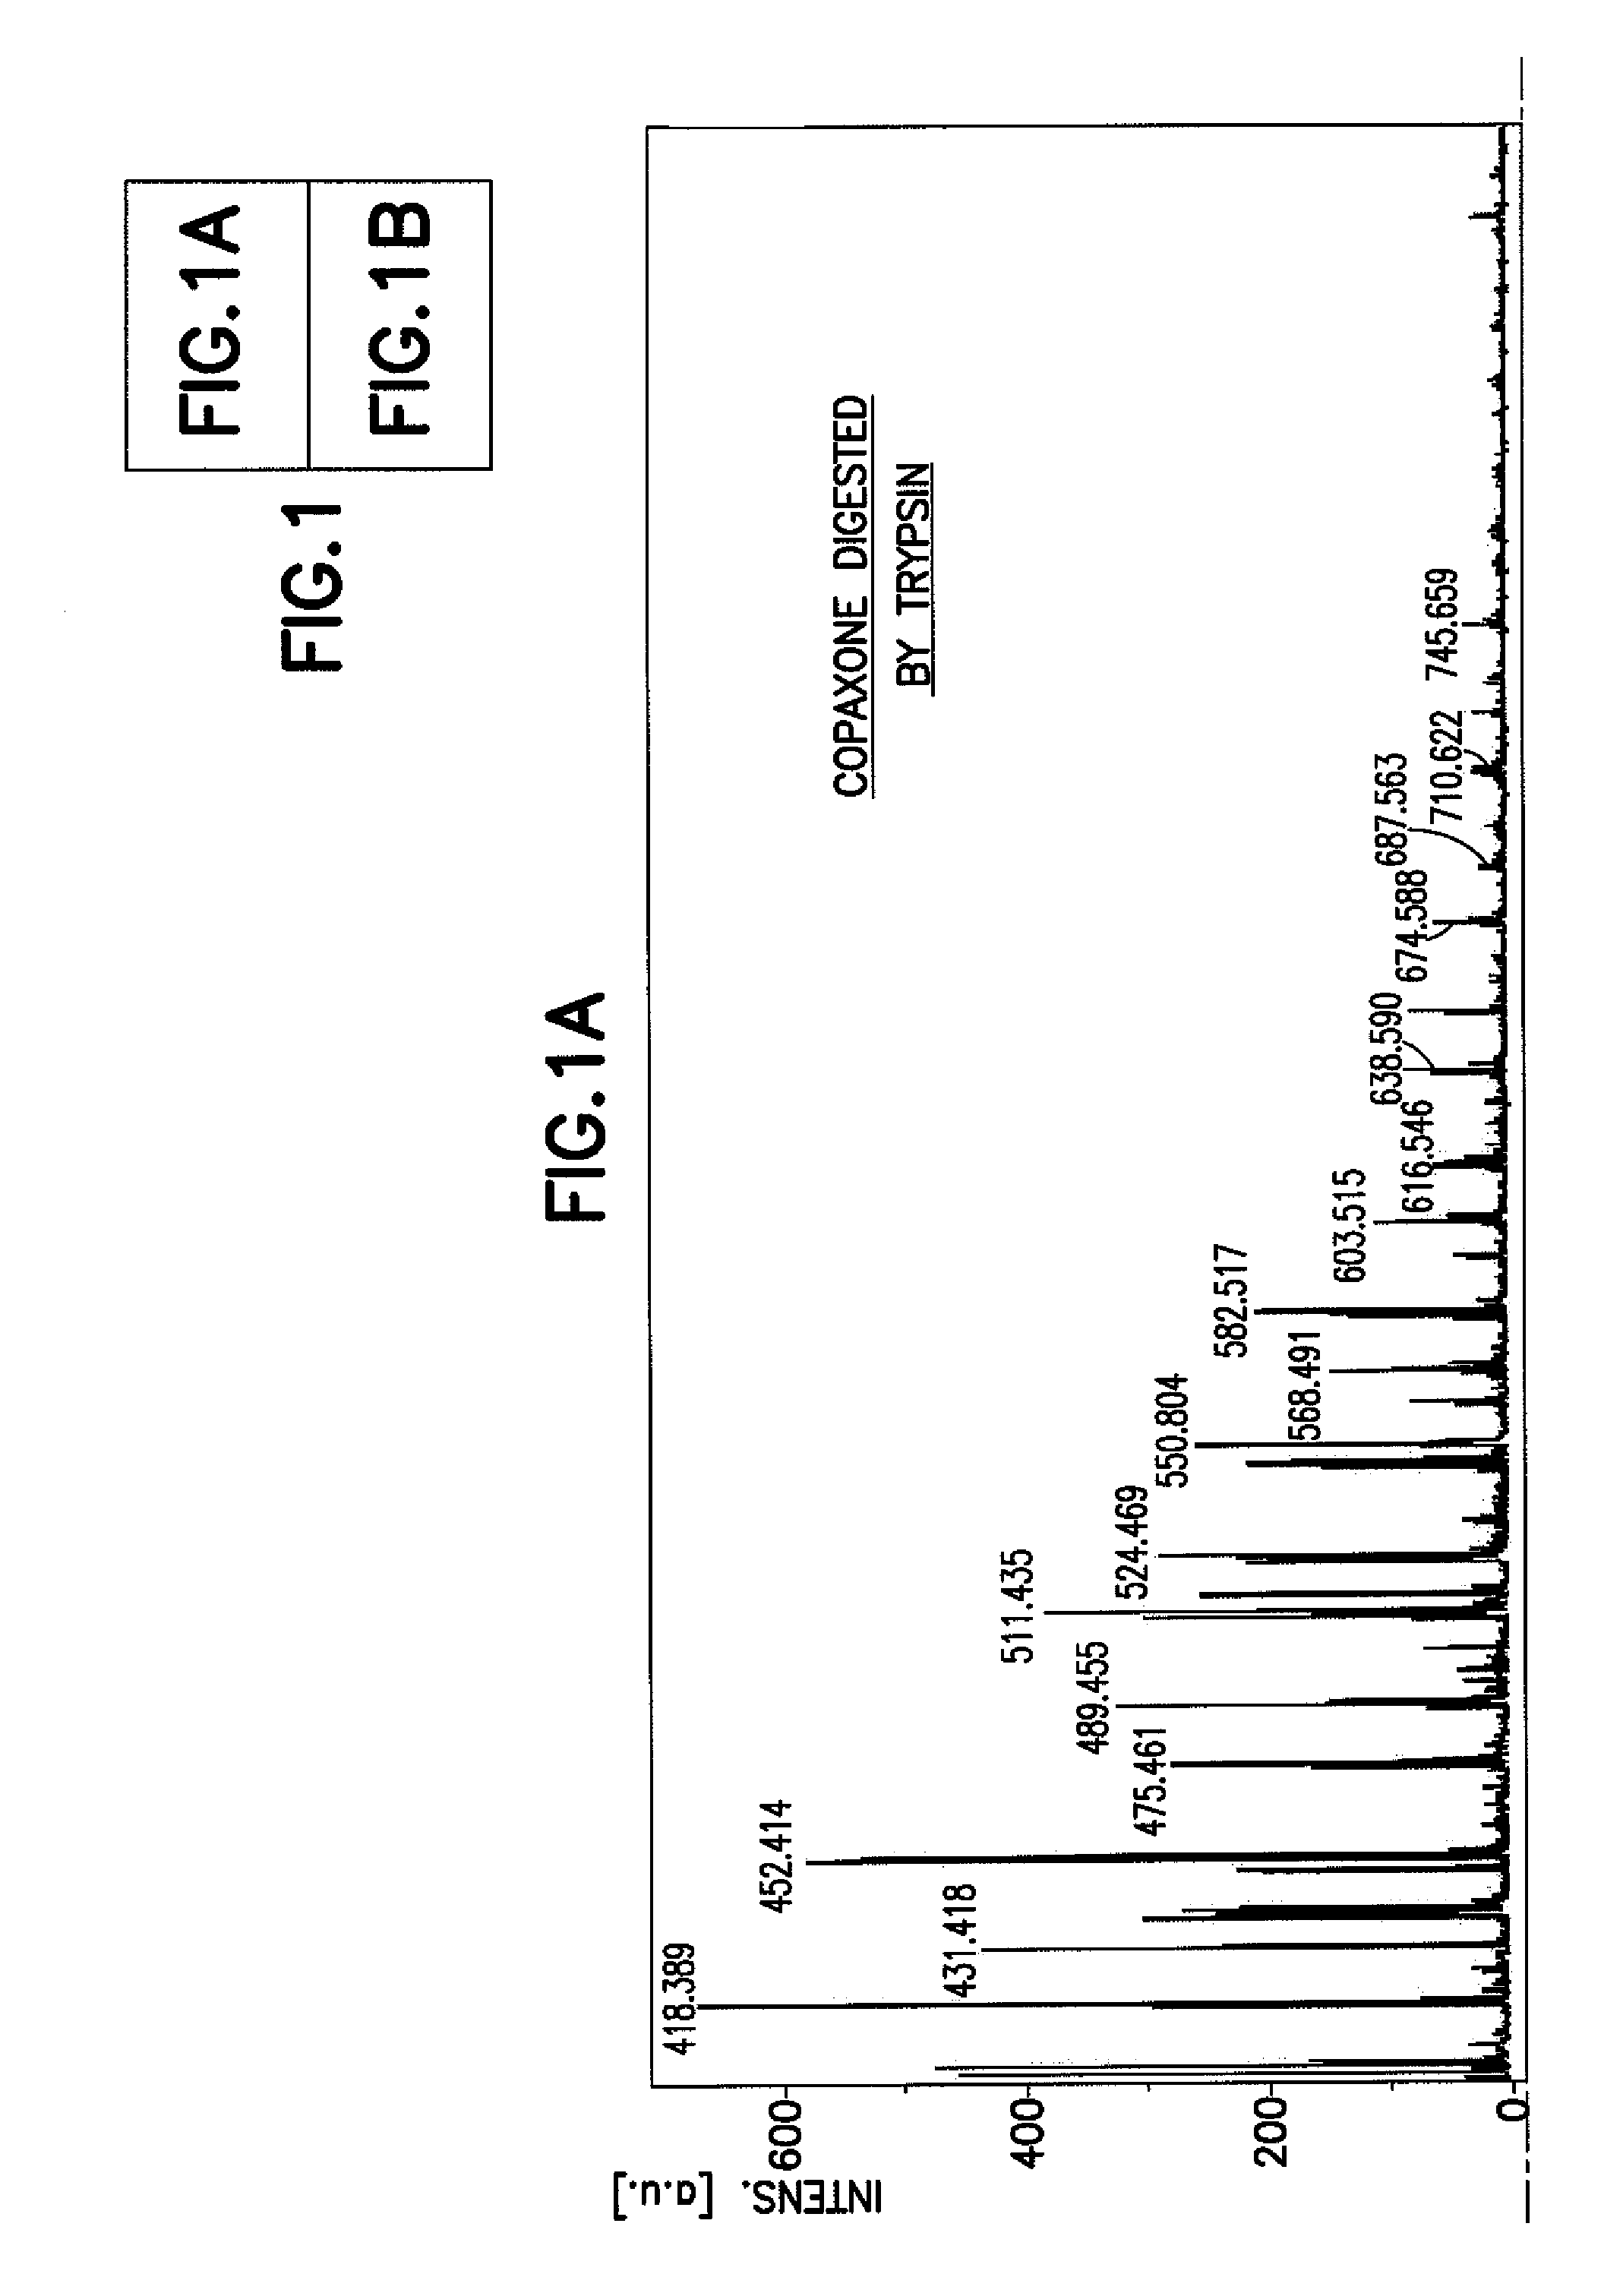 Methods for Chemical Equivalence in characterizing of complex molecules